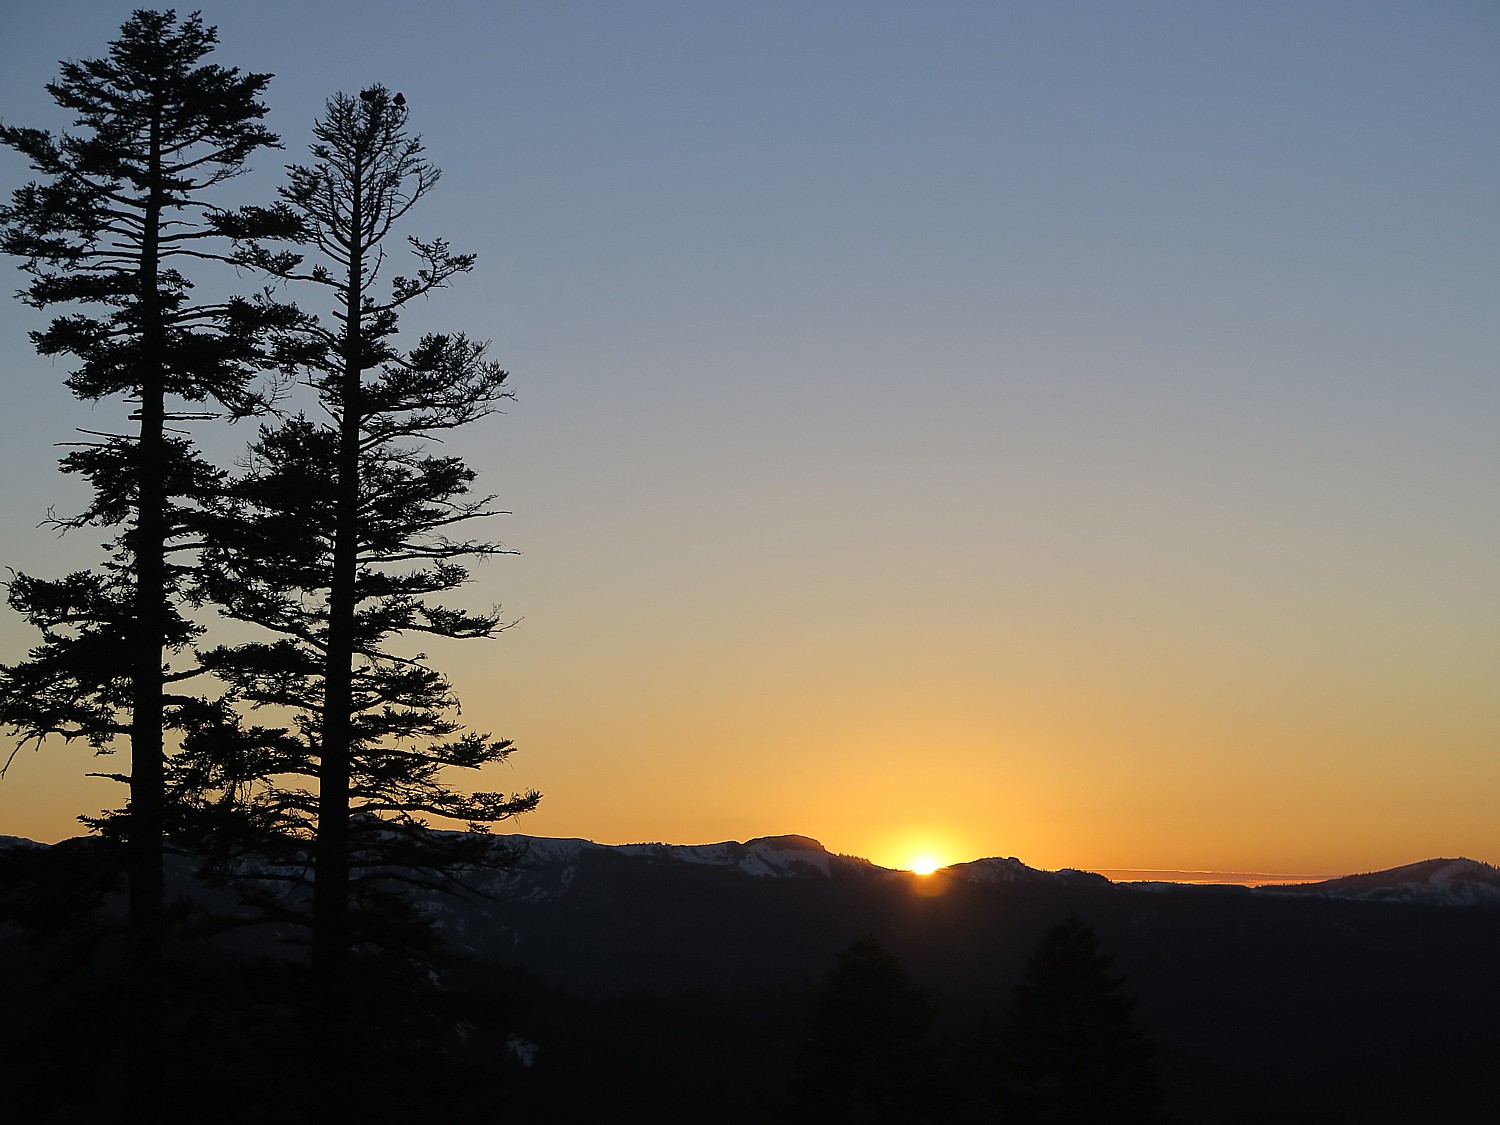 Sunset over the Pacific Crest from the Zephyr Lodge during the Mountain Table Dinner at Northstar California © 2015 Karen Rubin/news-photos-features.com